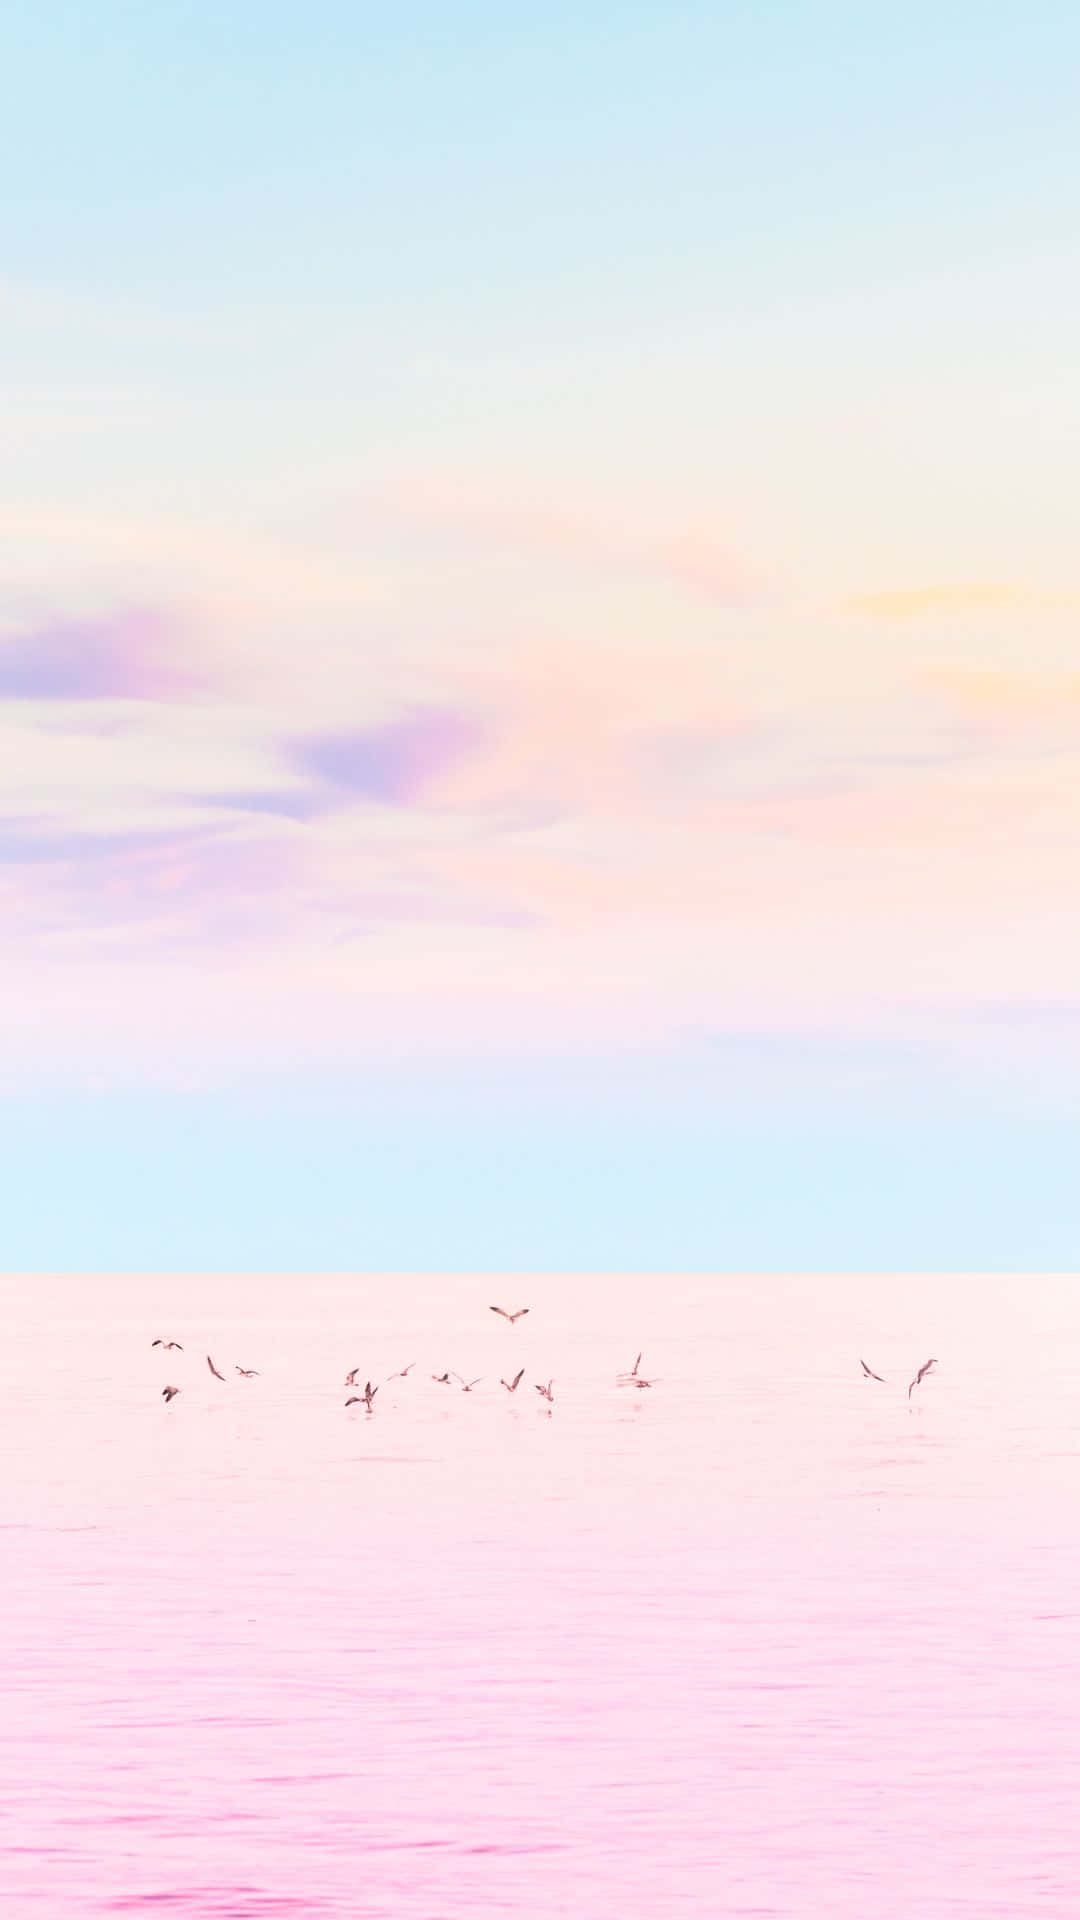 "delicate Pastel Pink Hue Creating A Serene Calm Background"